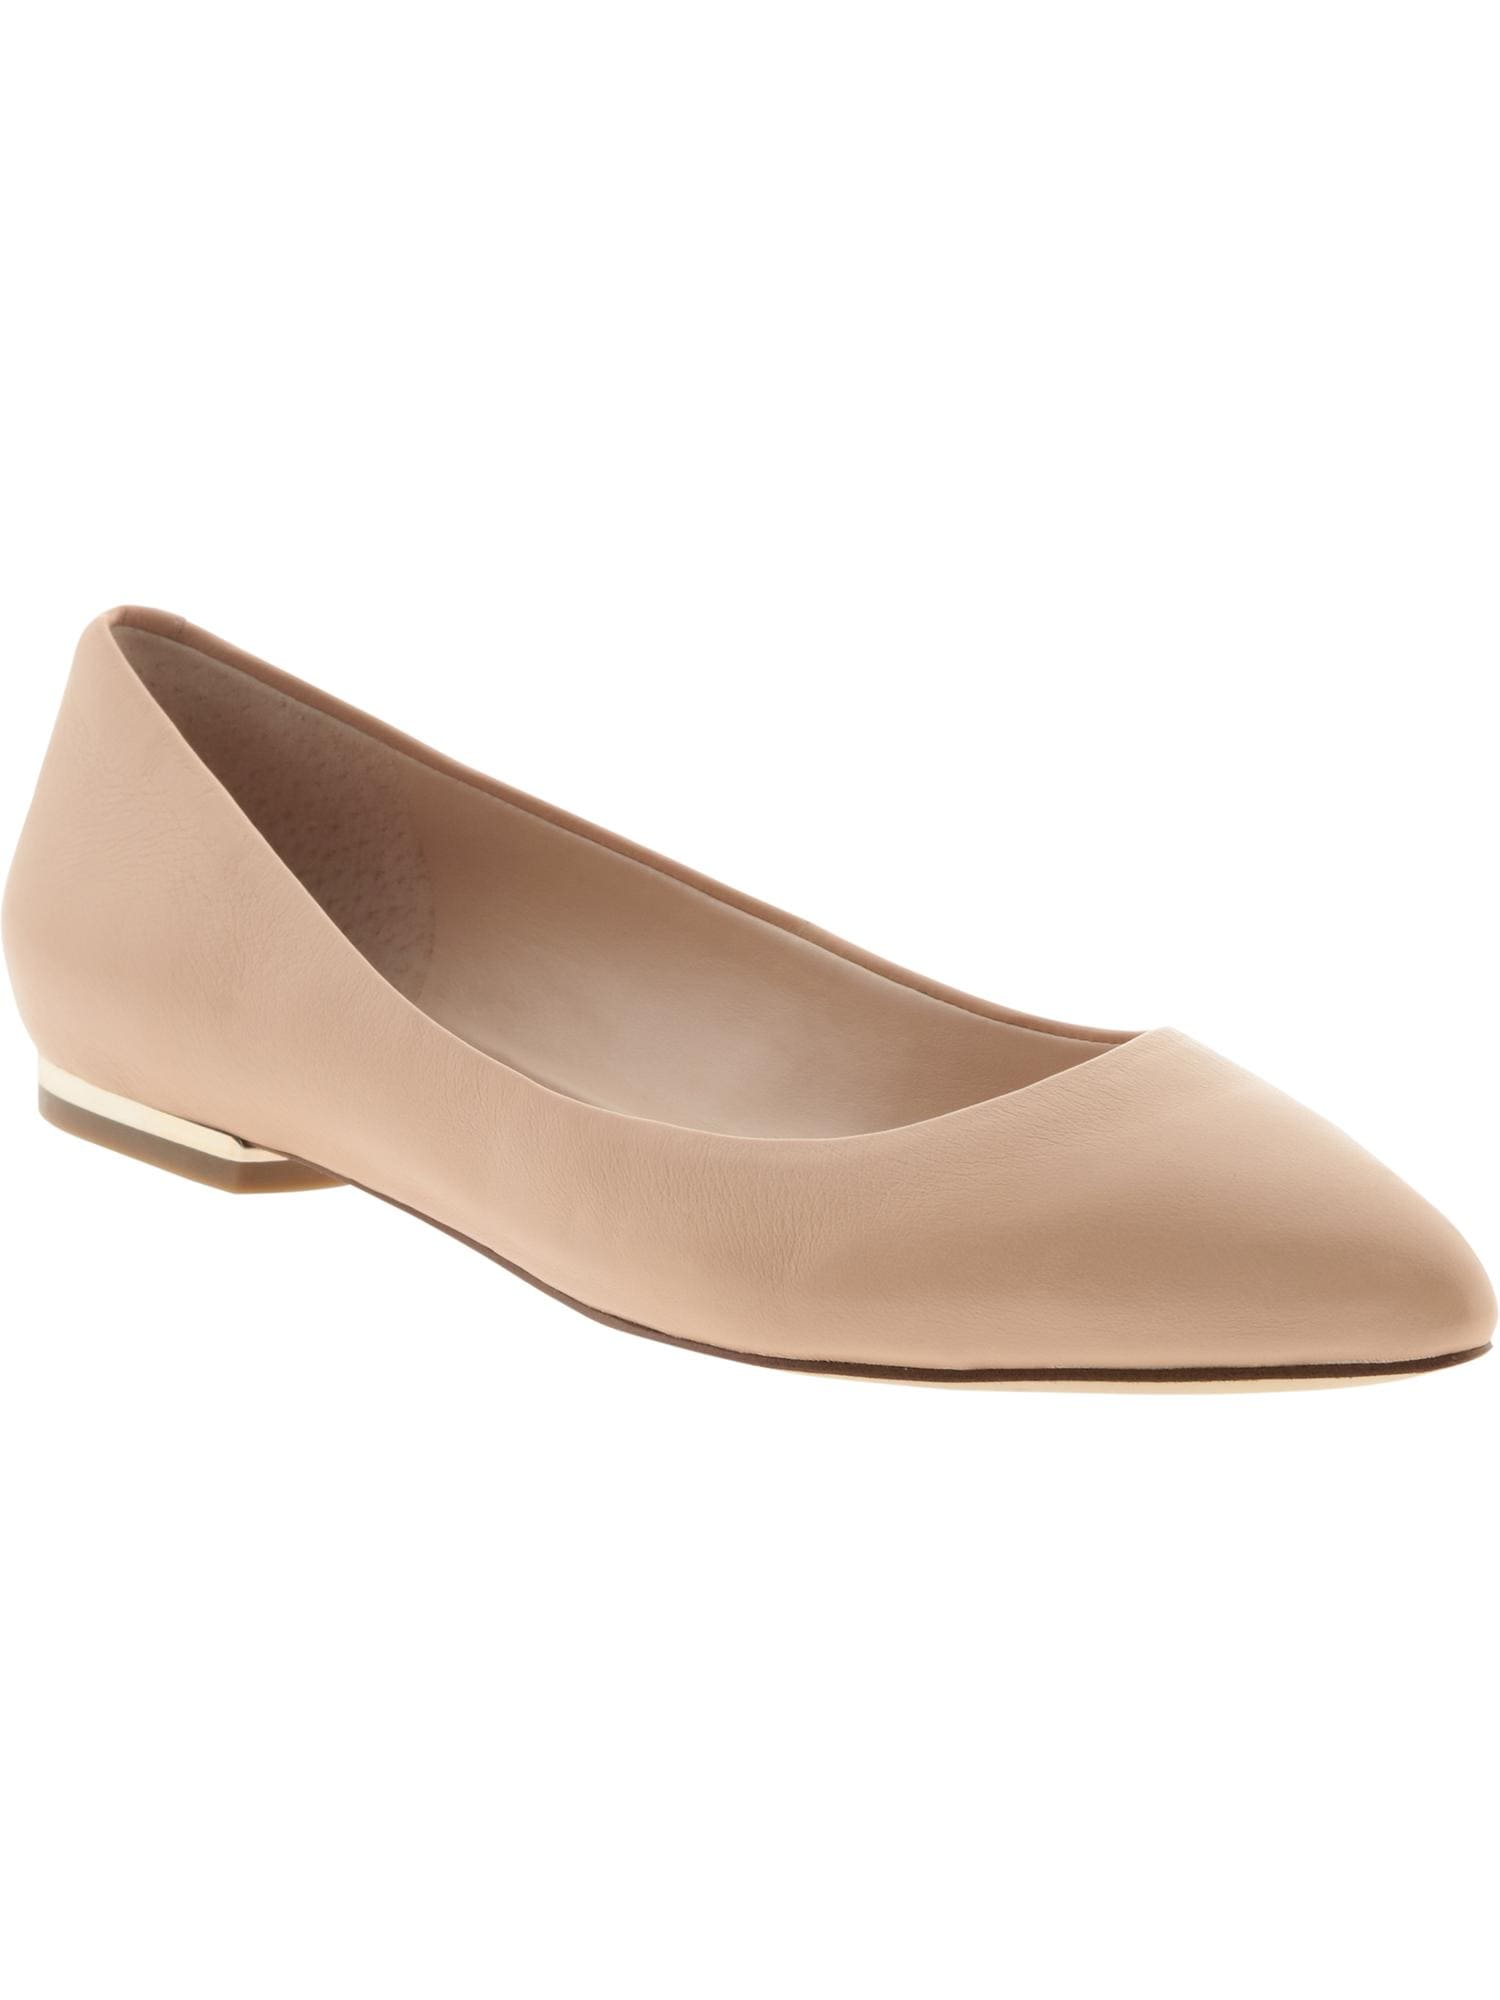 Carlie Pointed Toe Flat